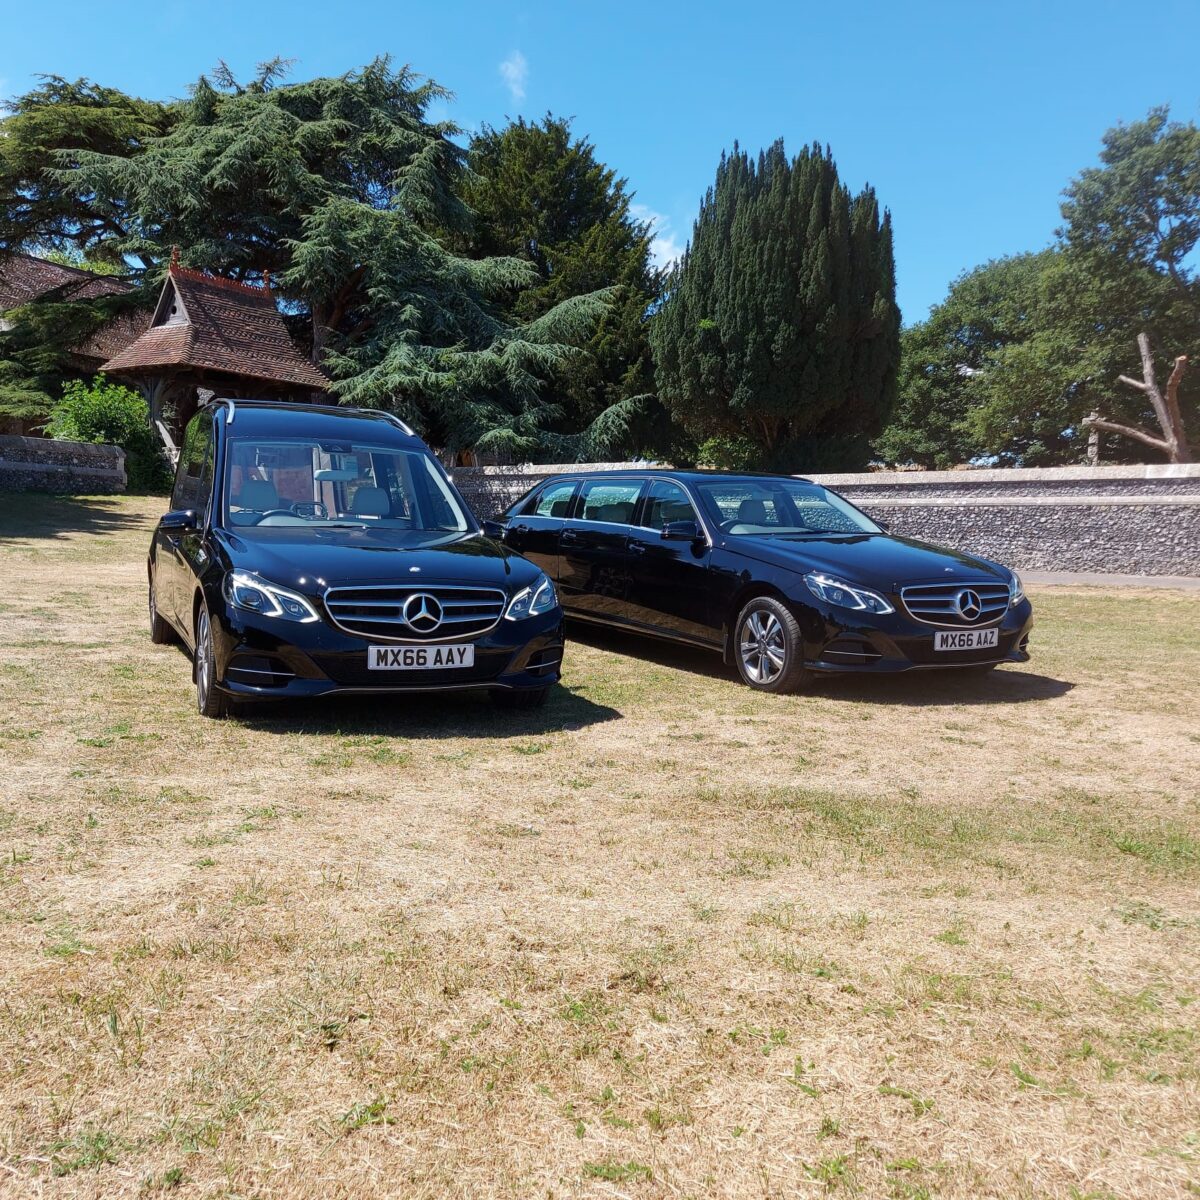 Mercedes Benz black funeral hearse & limo